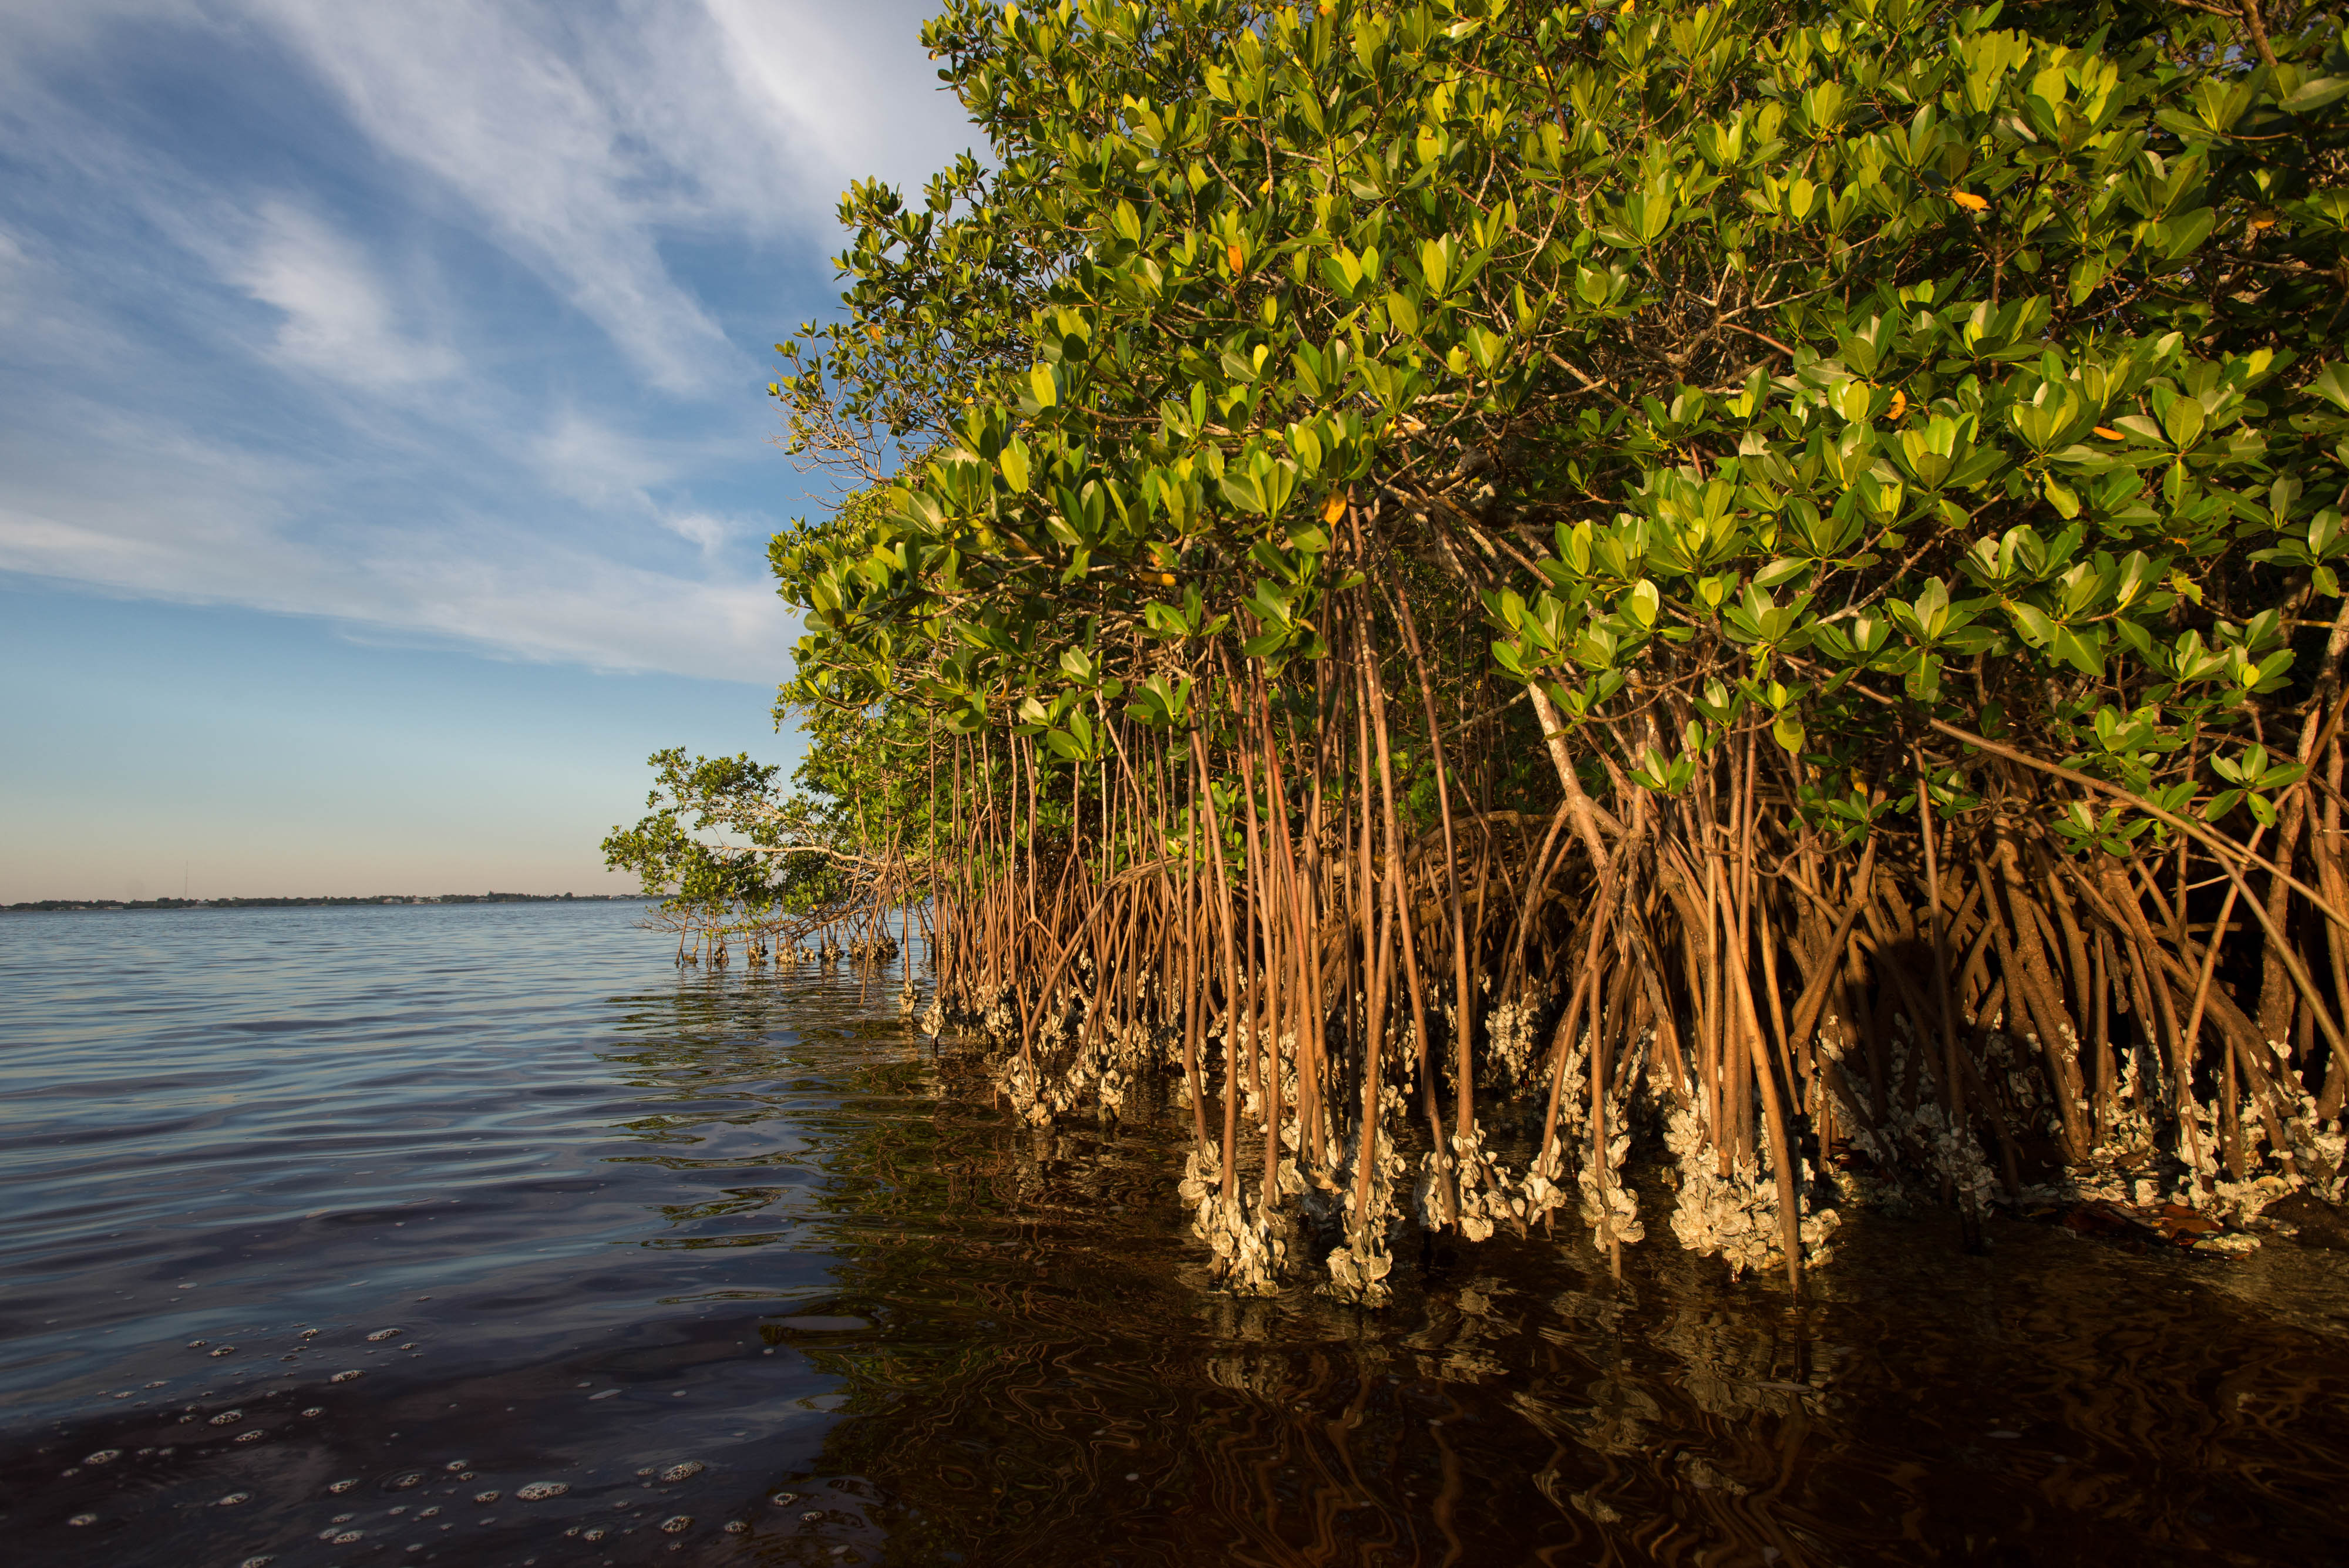 A group of mangroves with exposed roots sit in coastal waters